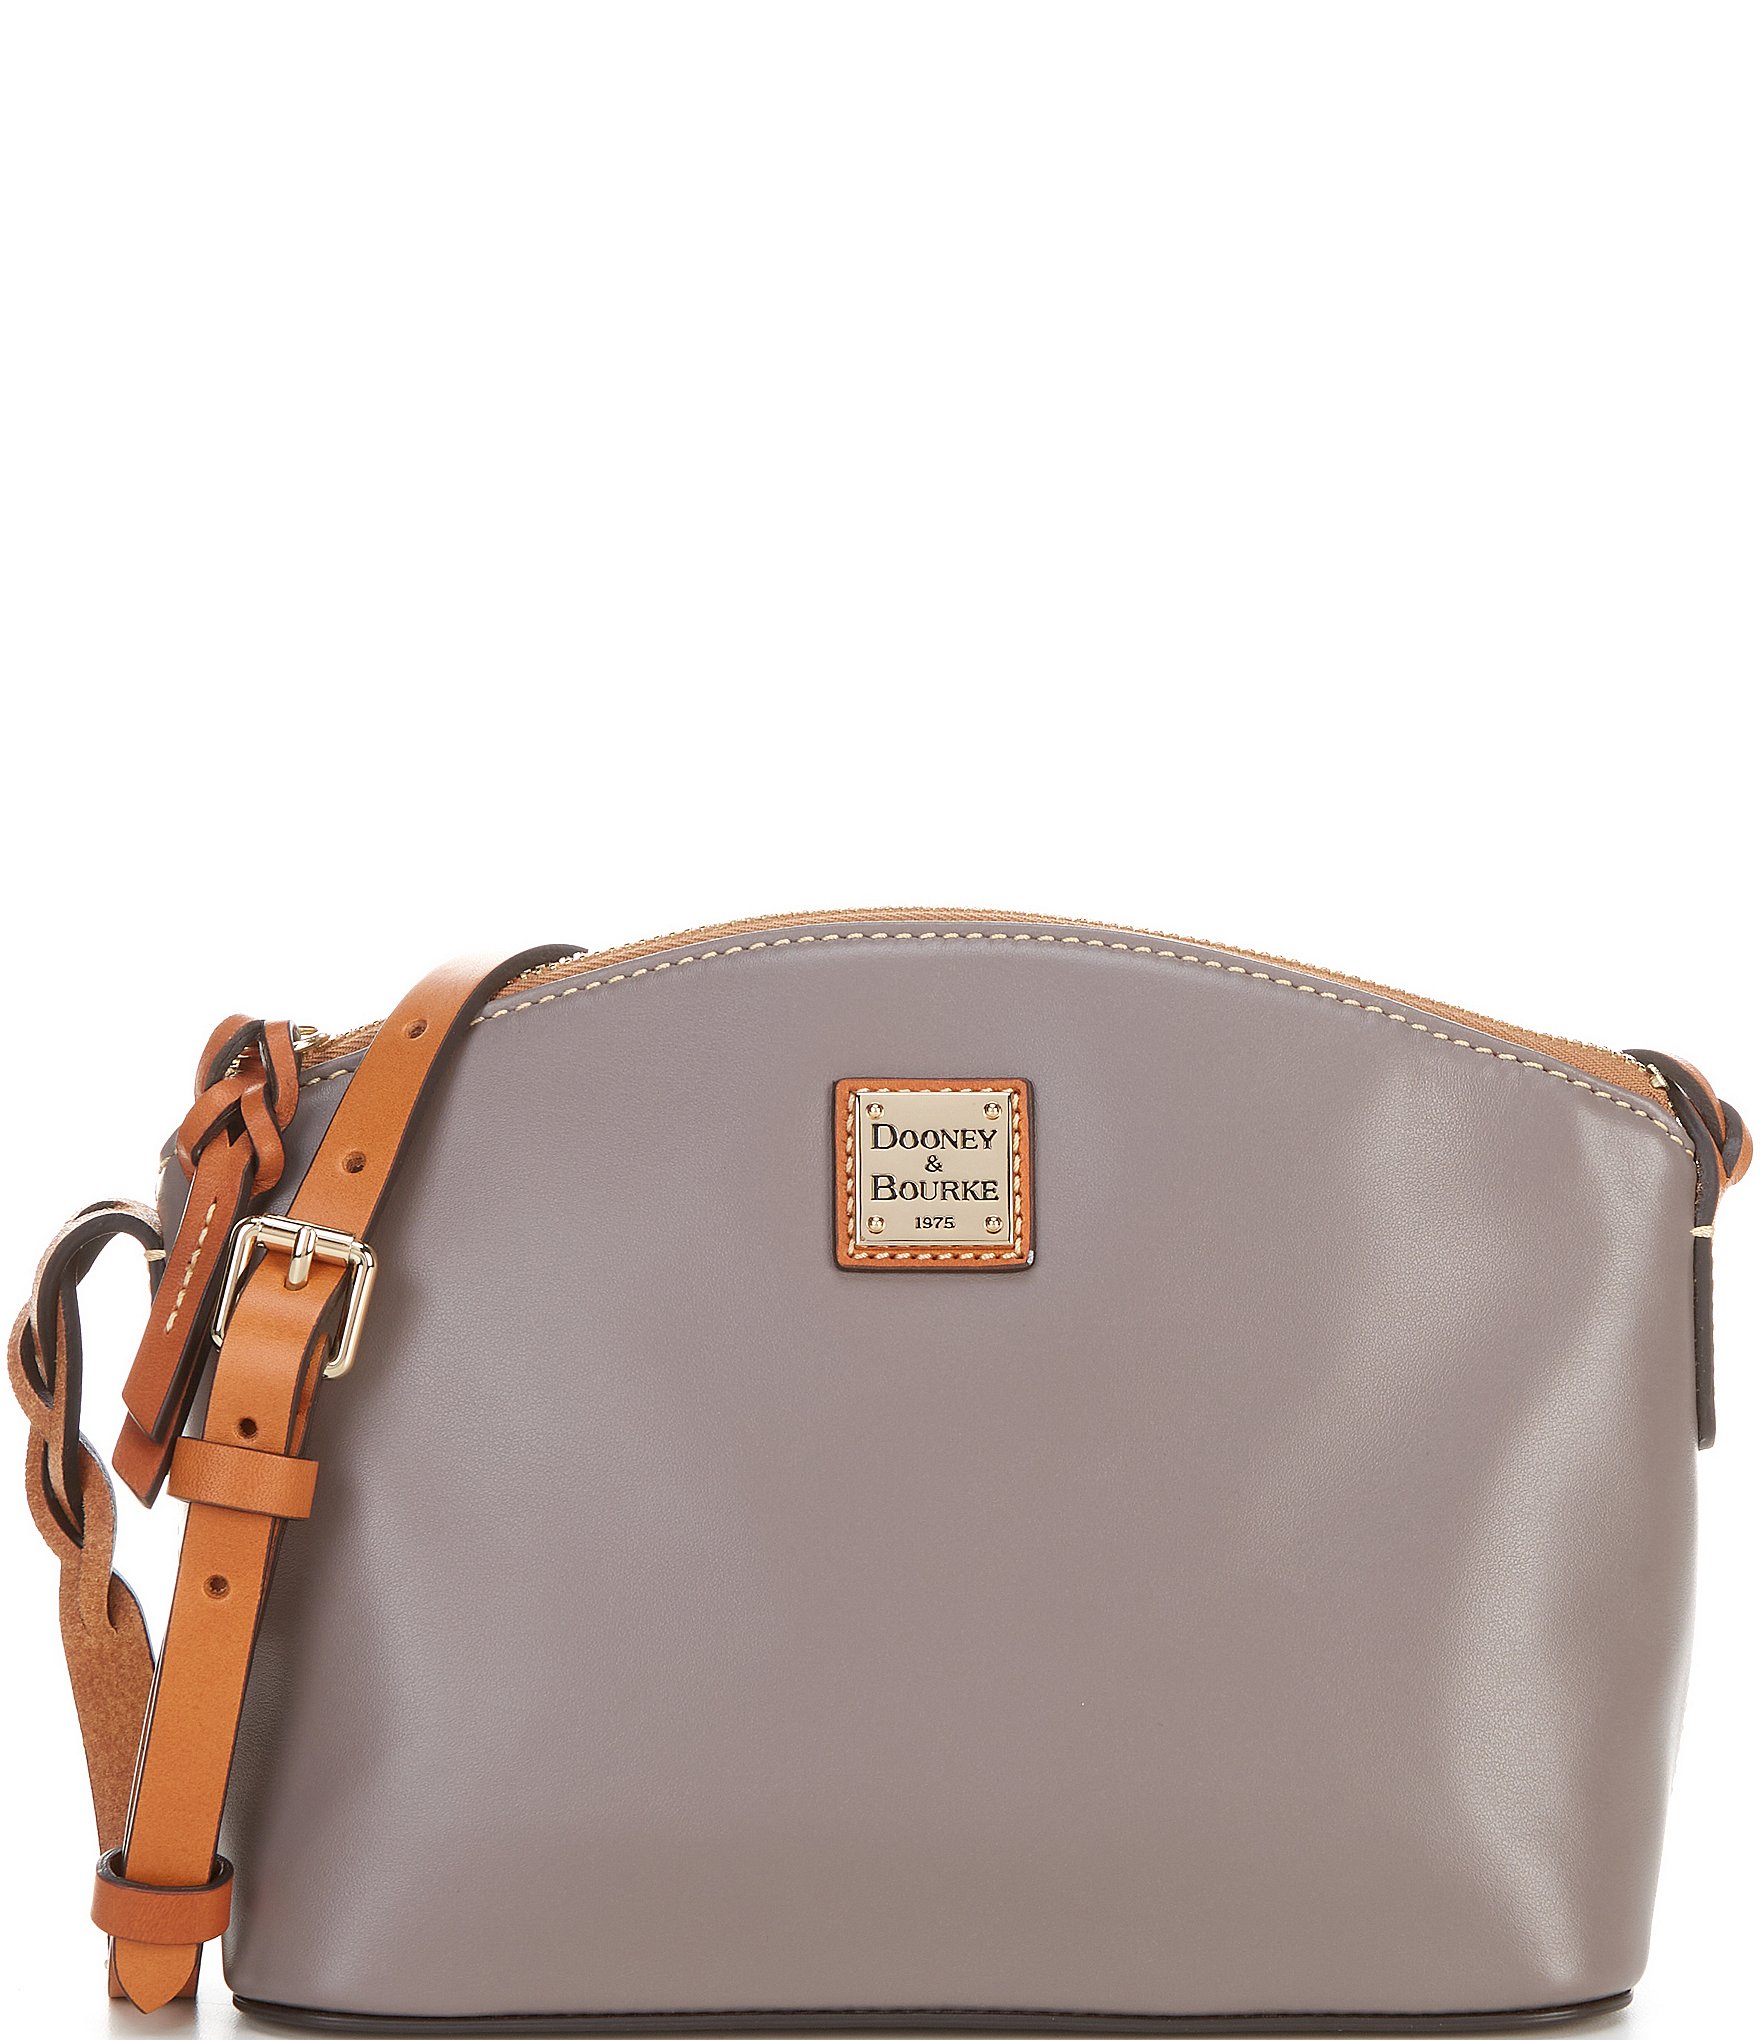 Dooney Bourke Wexford Collection Penny Crossbody Bag - Taupe